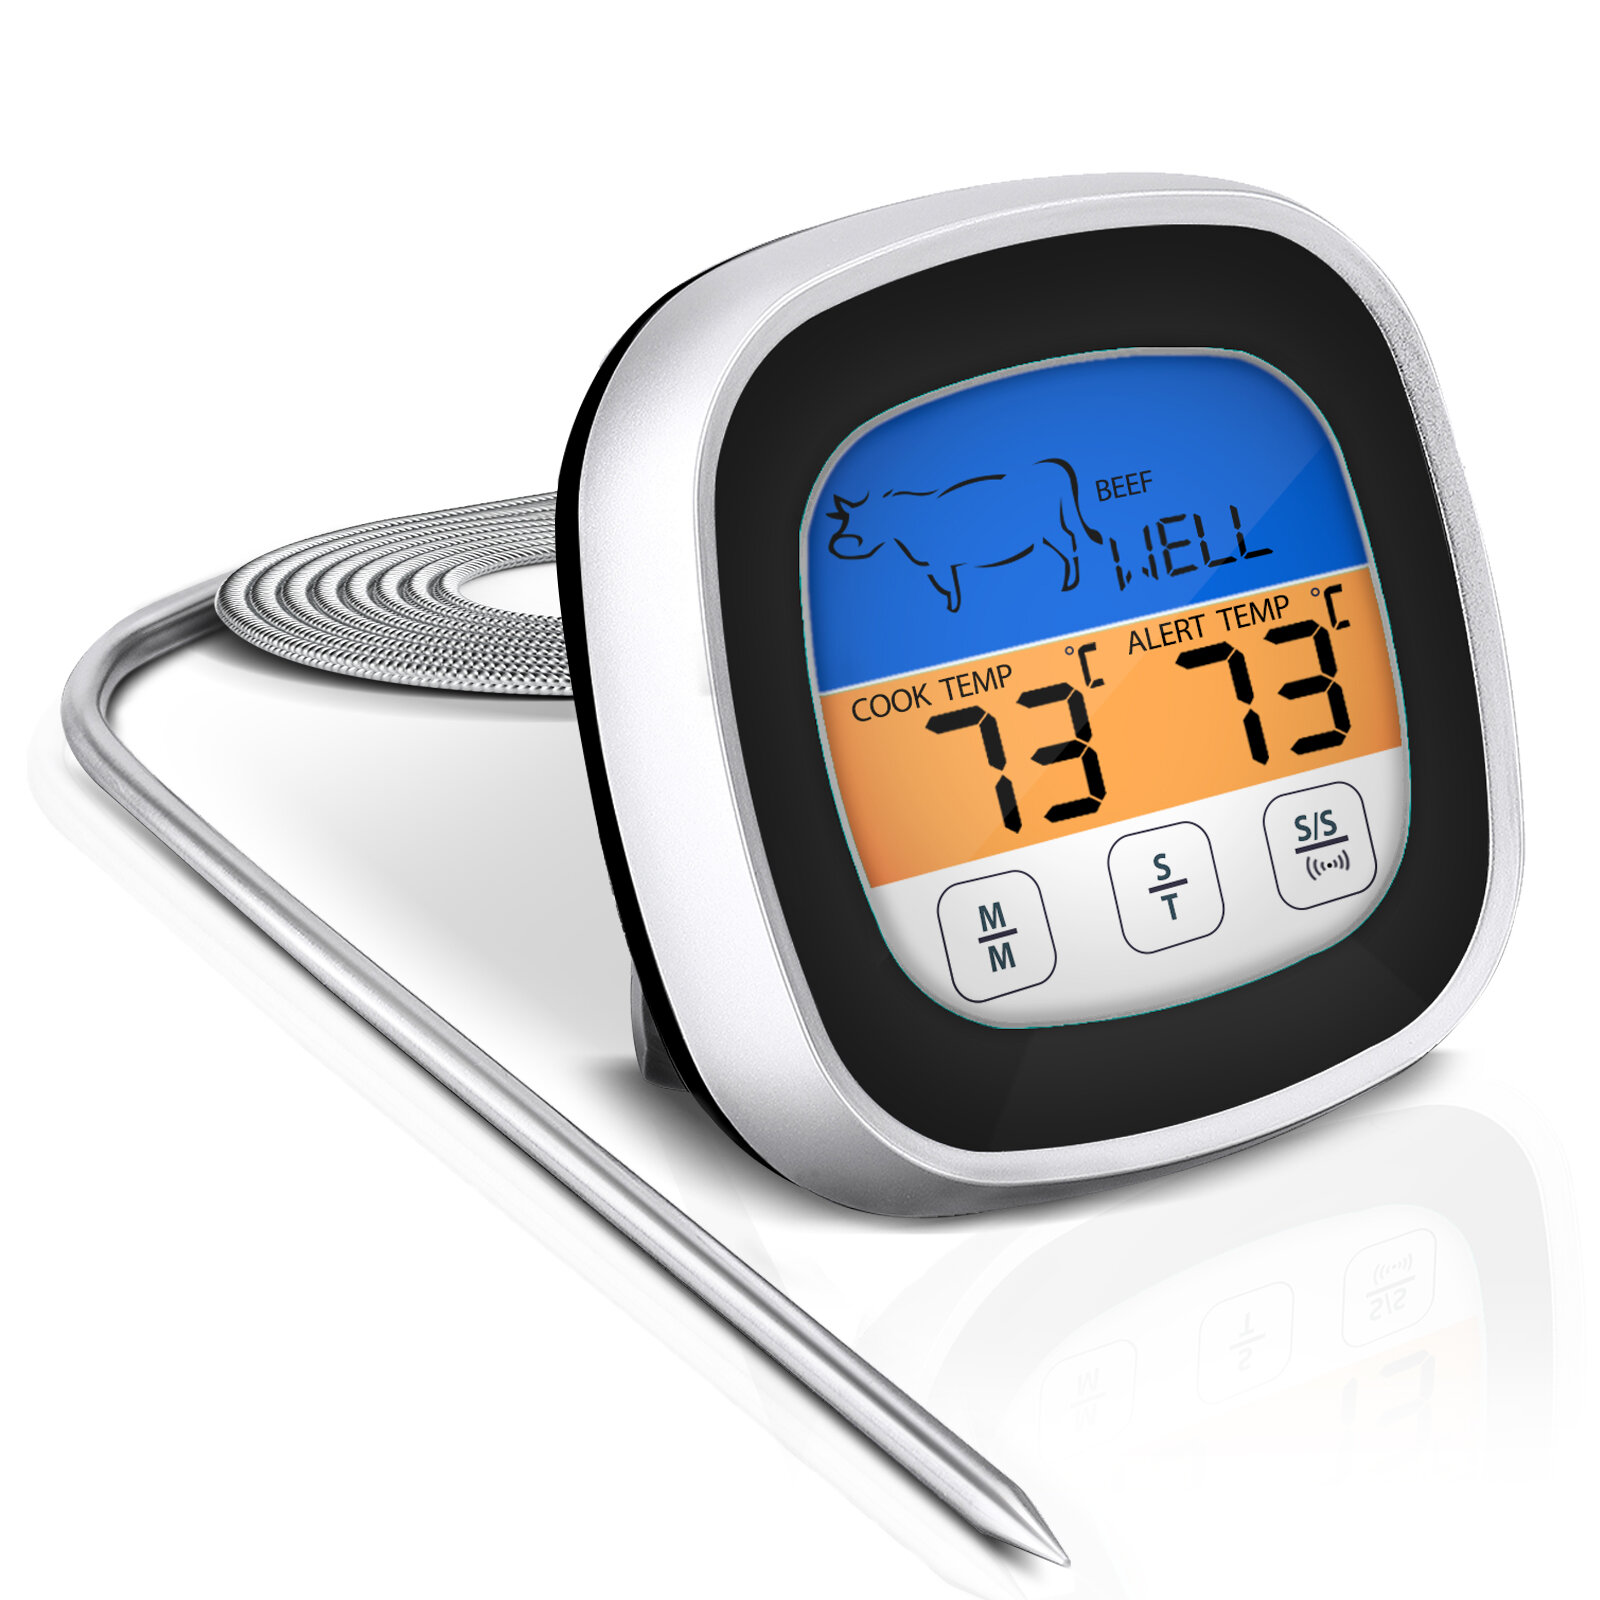 Vlees Voedsel Thermometer Digitale Instant Lezen Koken Keuken Voedsel Thermometer Met Waterdicht Ultra Snelle LCD Touch Backlight Magneet Opvouwbare Sonde Voor Grill Olie Frituur Buiten BBQ